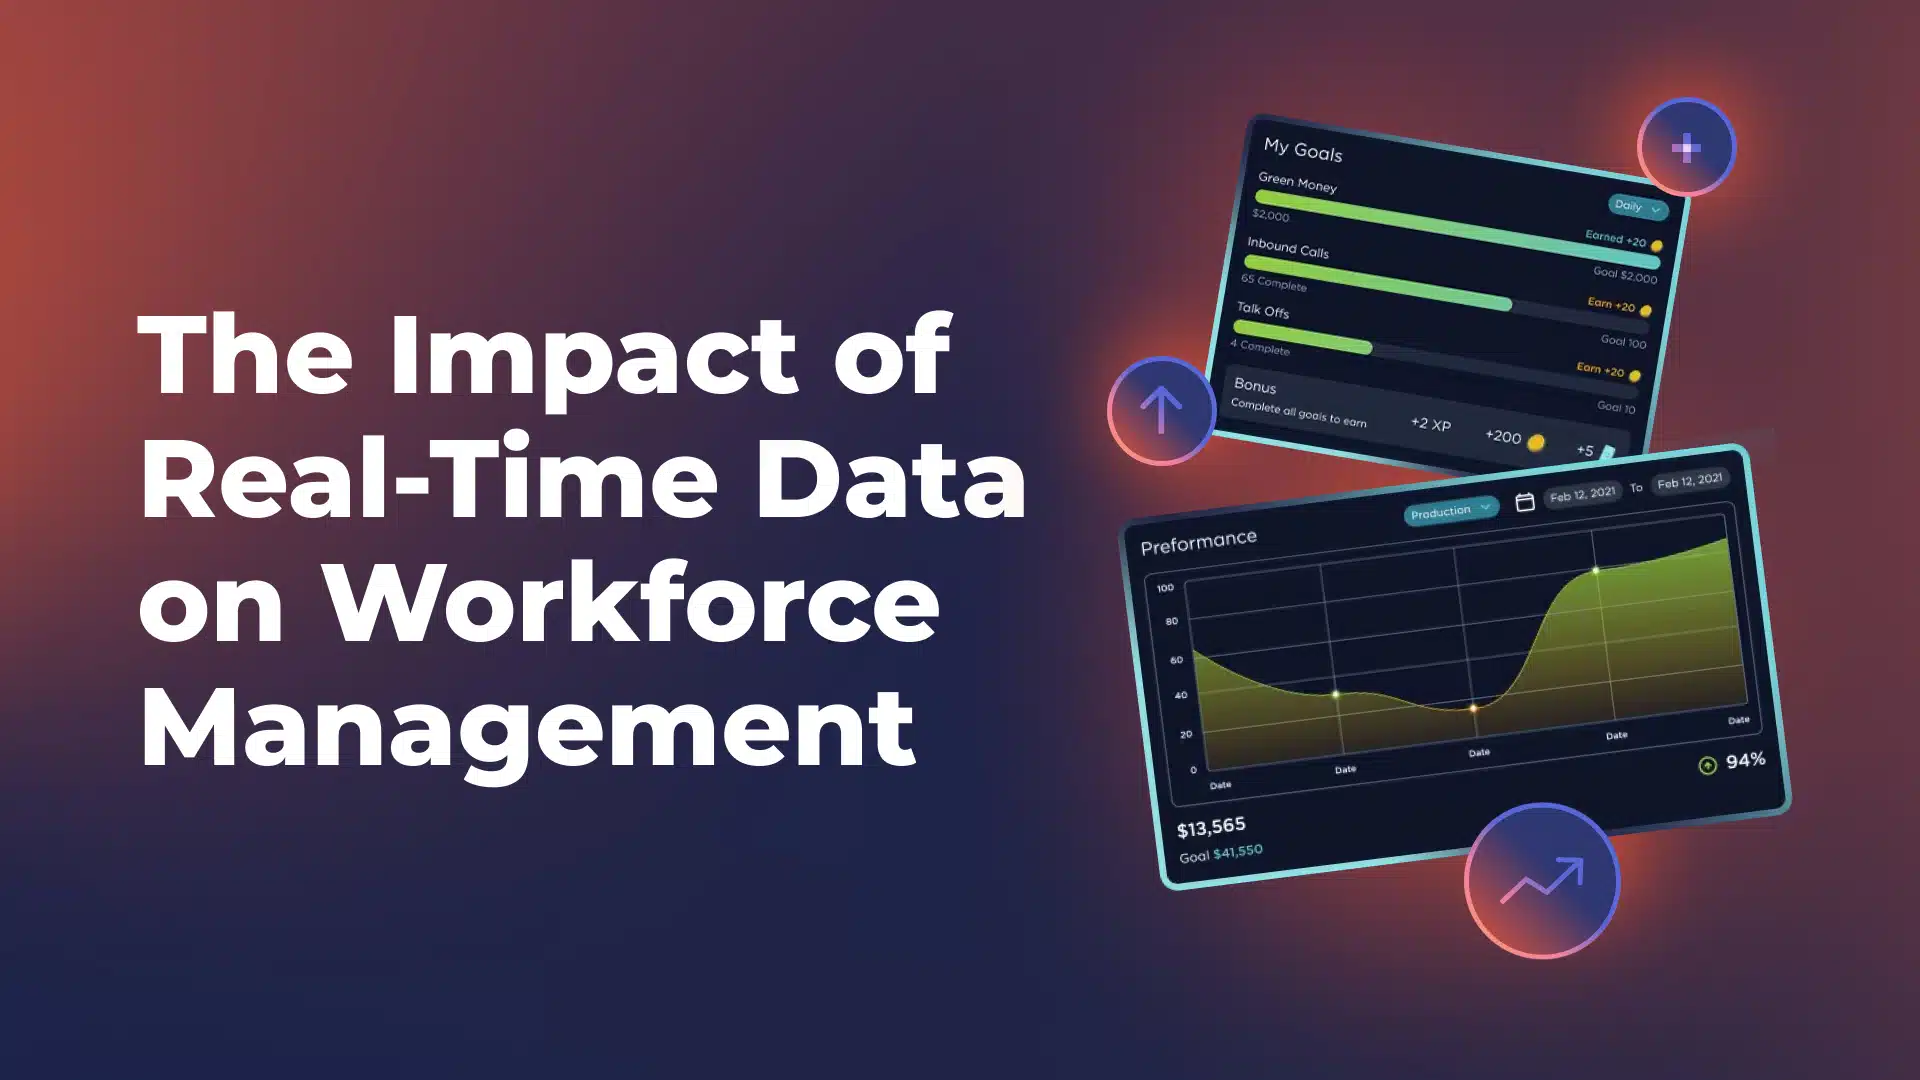 New blog post titled "The Impact of Real-Time Data on Workforce Management "